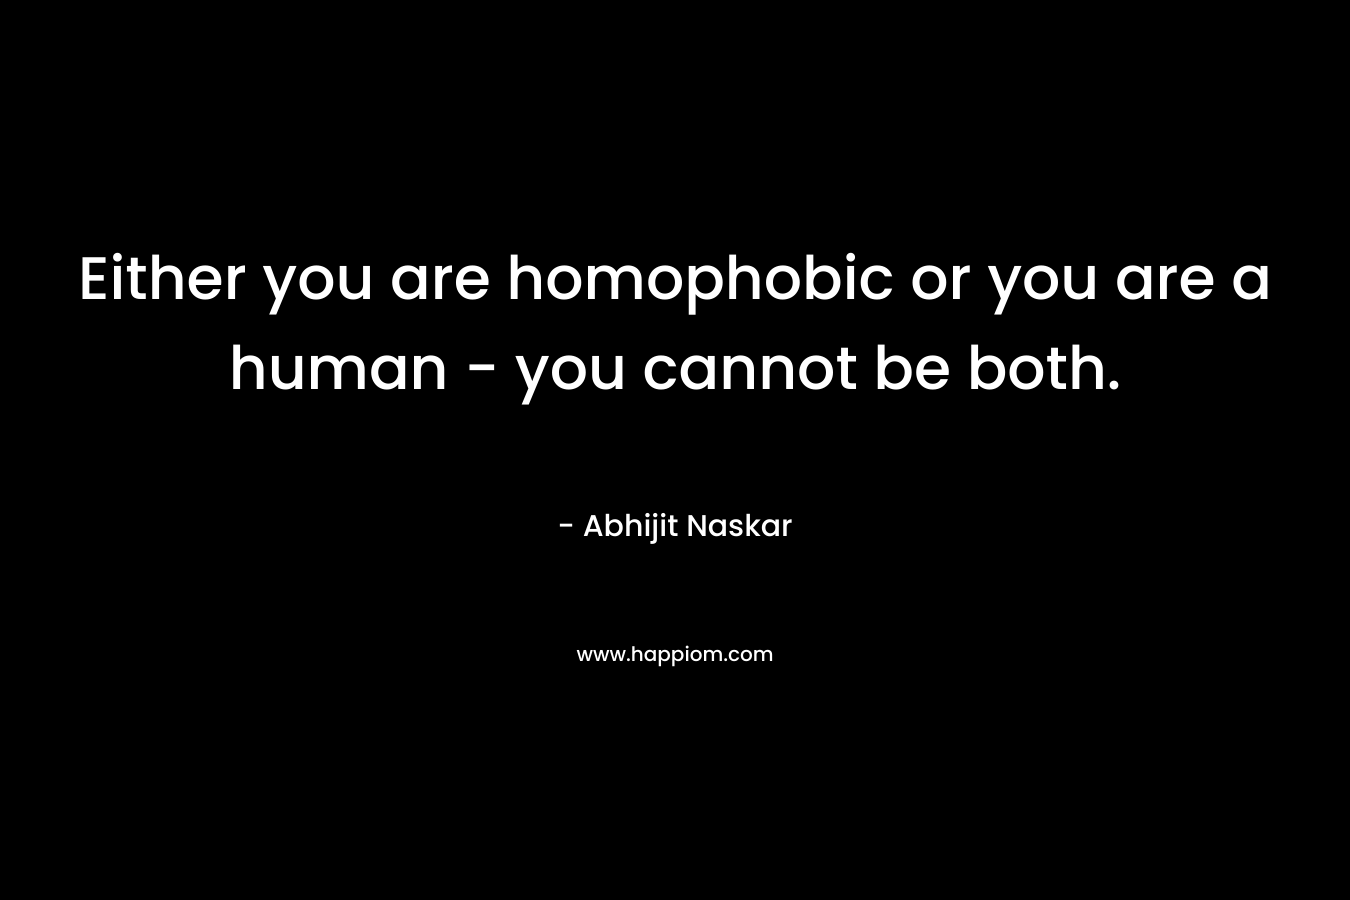 Either you are homophobic or you are a human - you cannot be both.